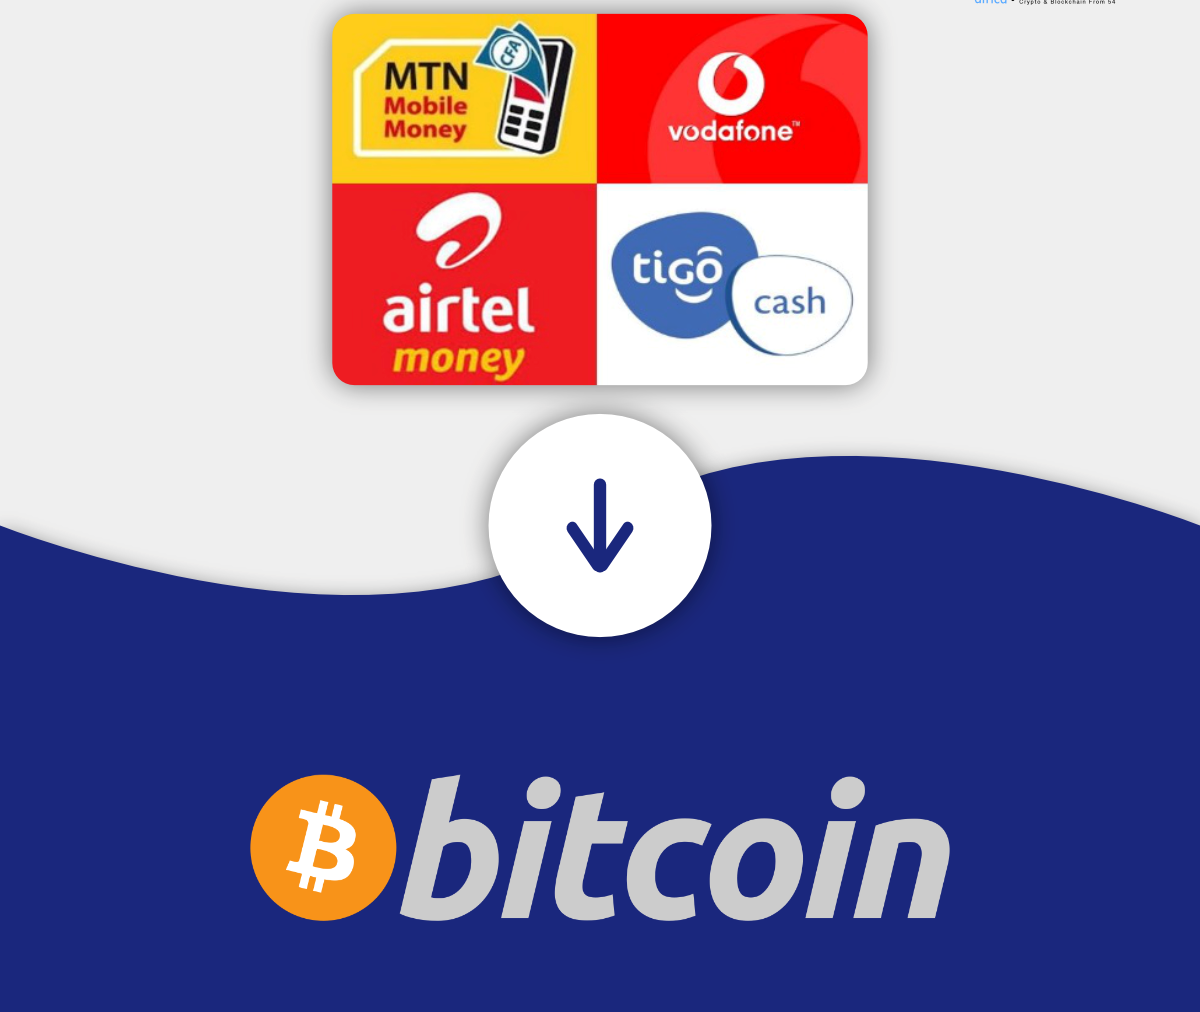 How To Withdraw Bitcoin Through Mobile Money In Ghana